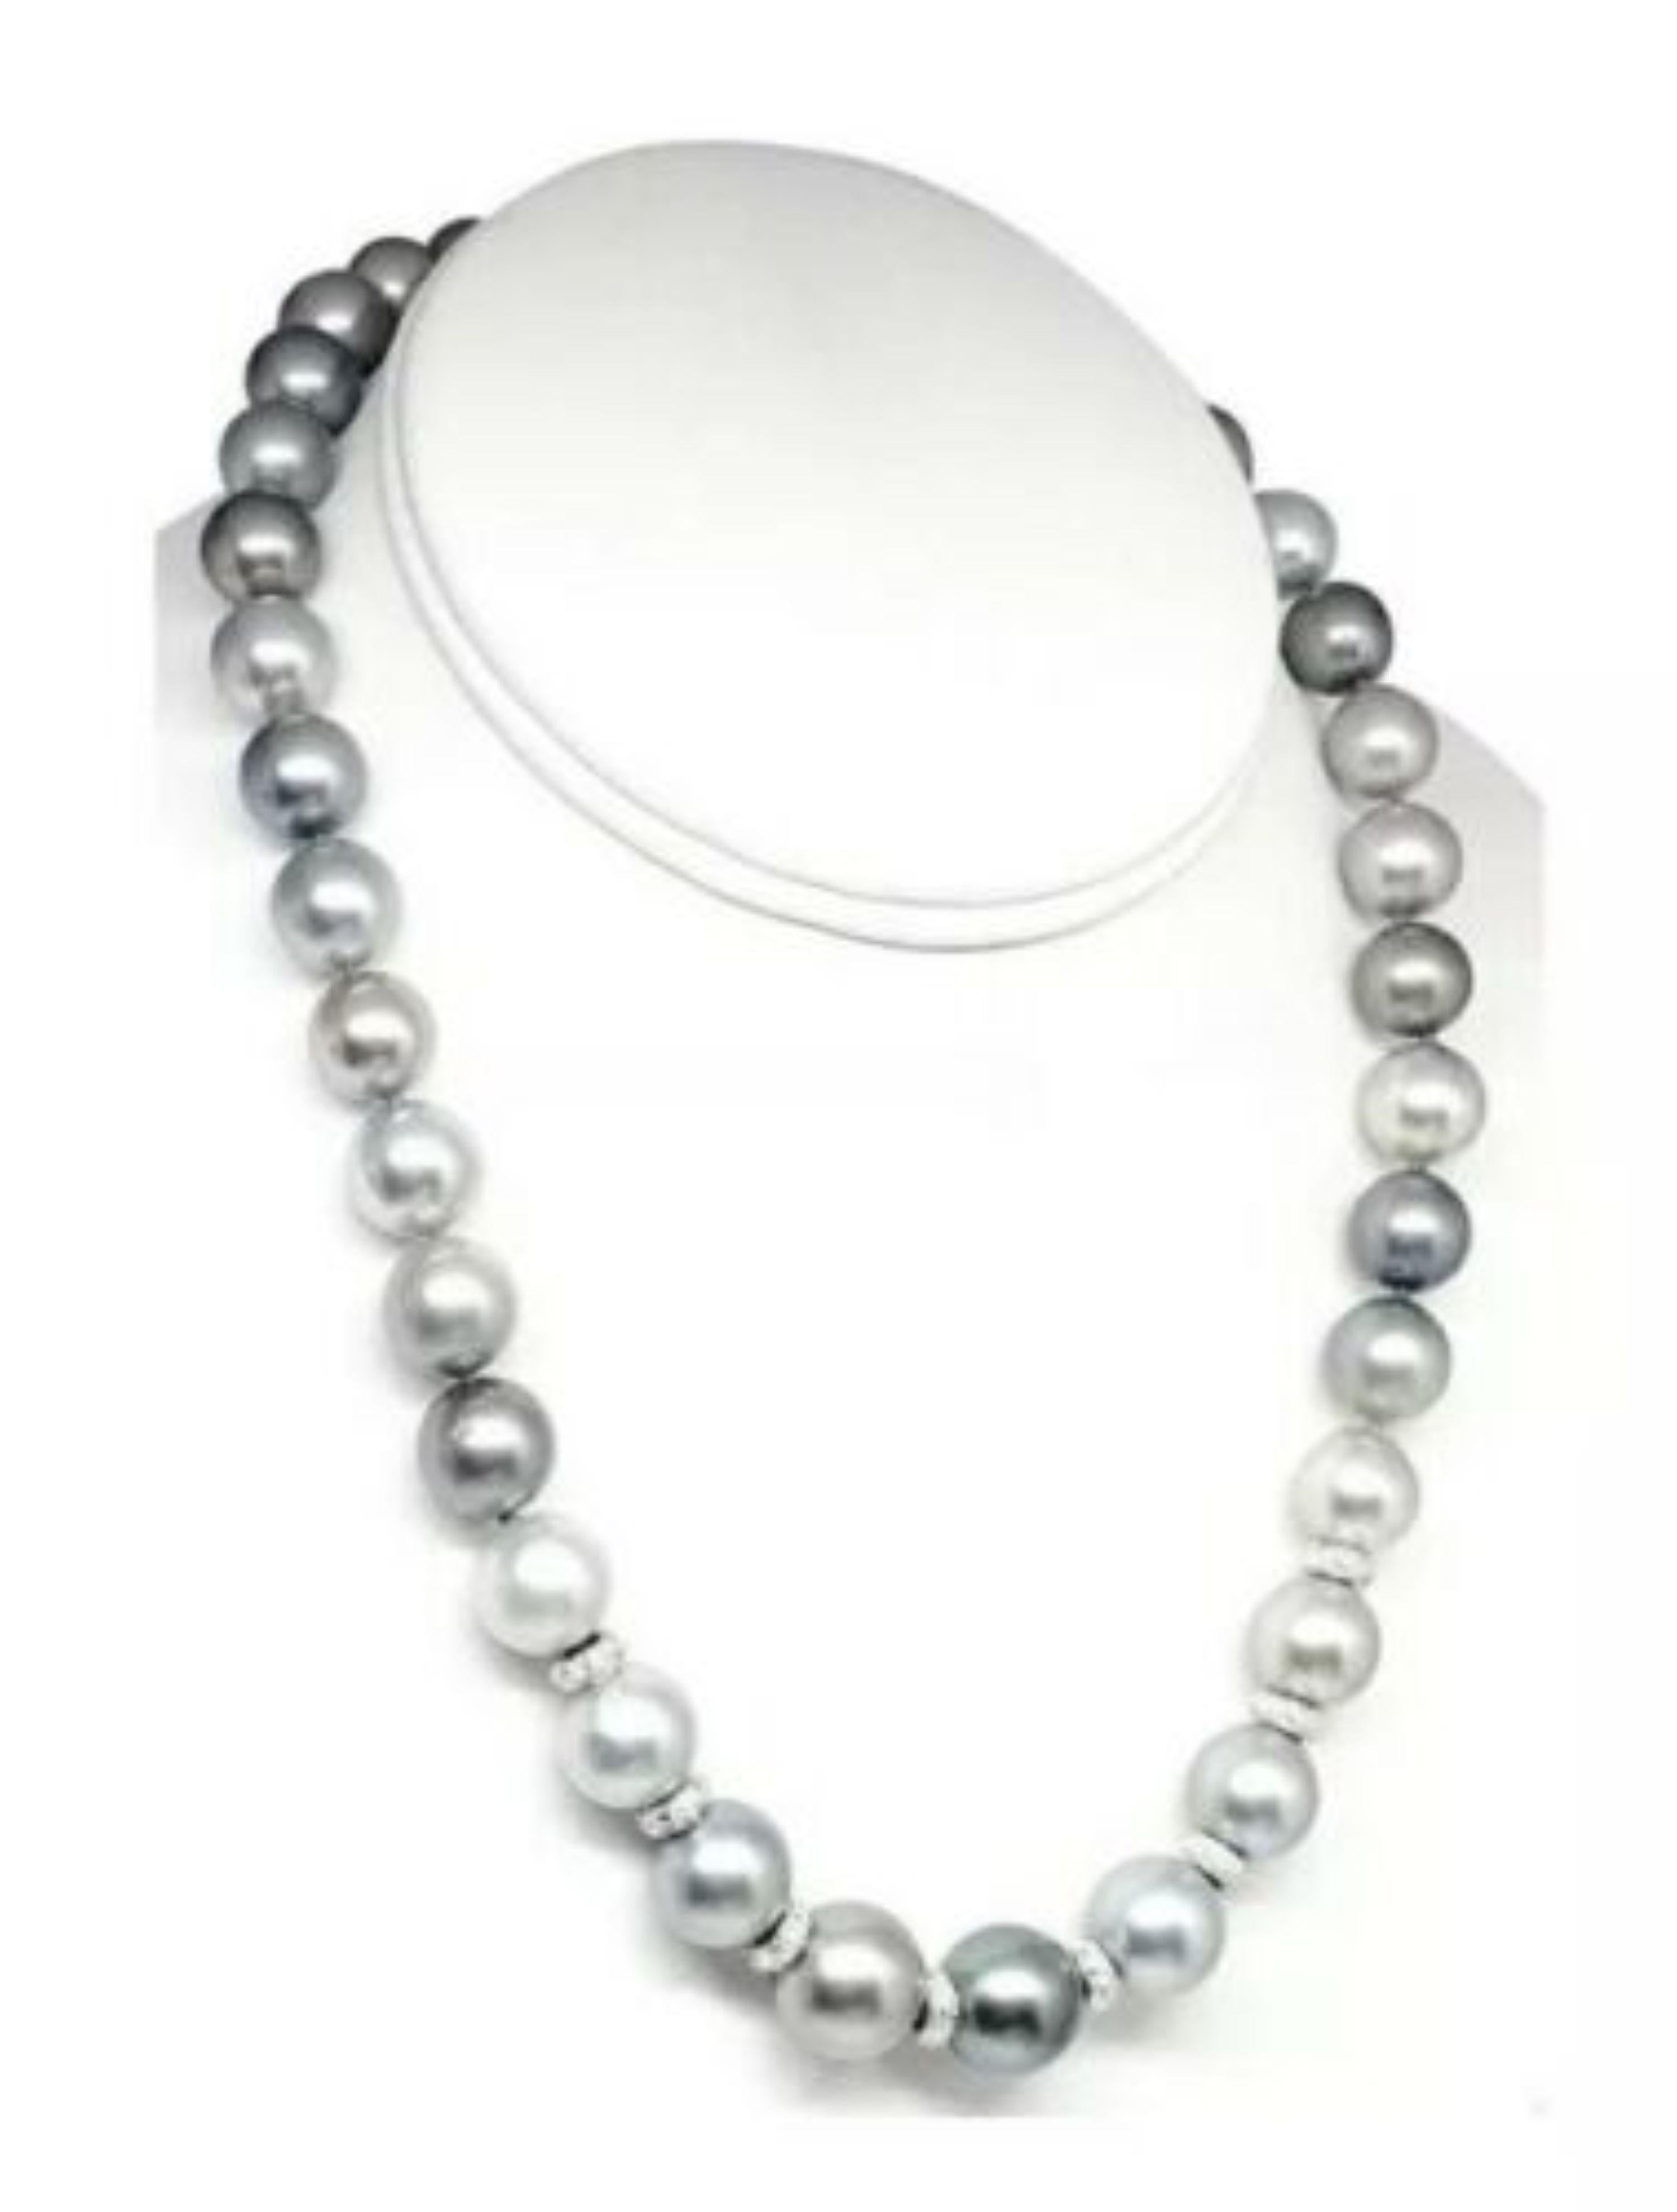 Fine Quality Tahitian Pearl Diamond Necklace 12.9 mm 18k Gold 17.25